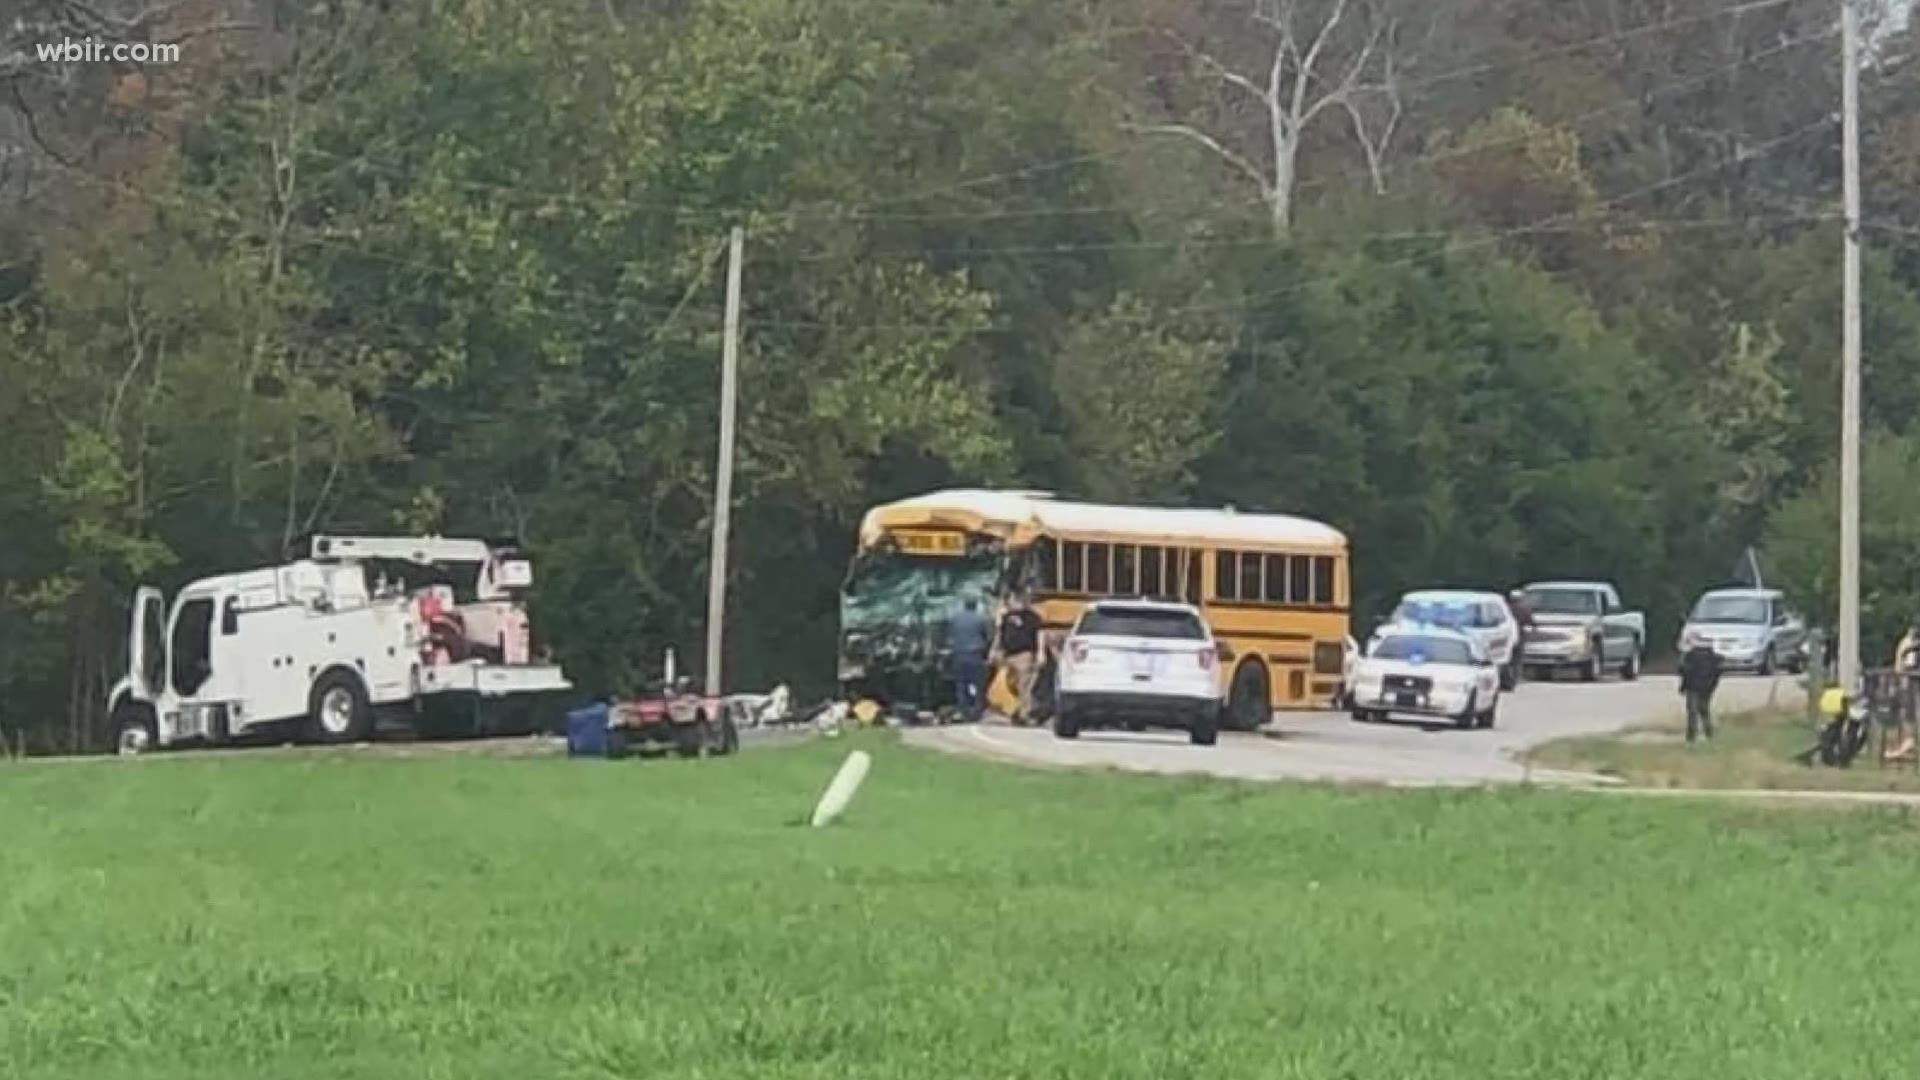 Four children are still in the hospital after a terrible school bus crash in Meigs County. The crash killed the bus driver and a 7-year-old girl.